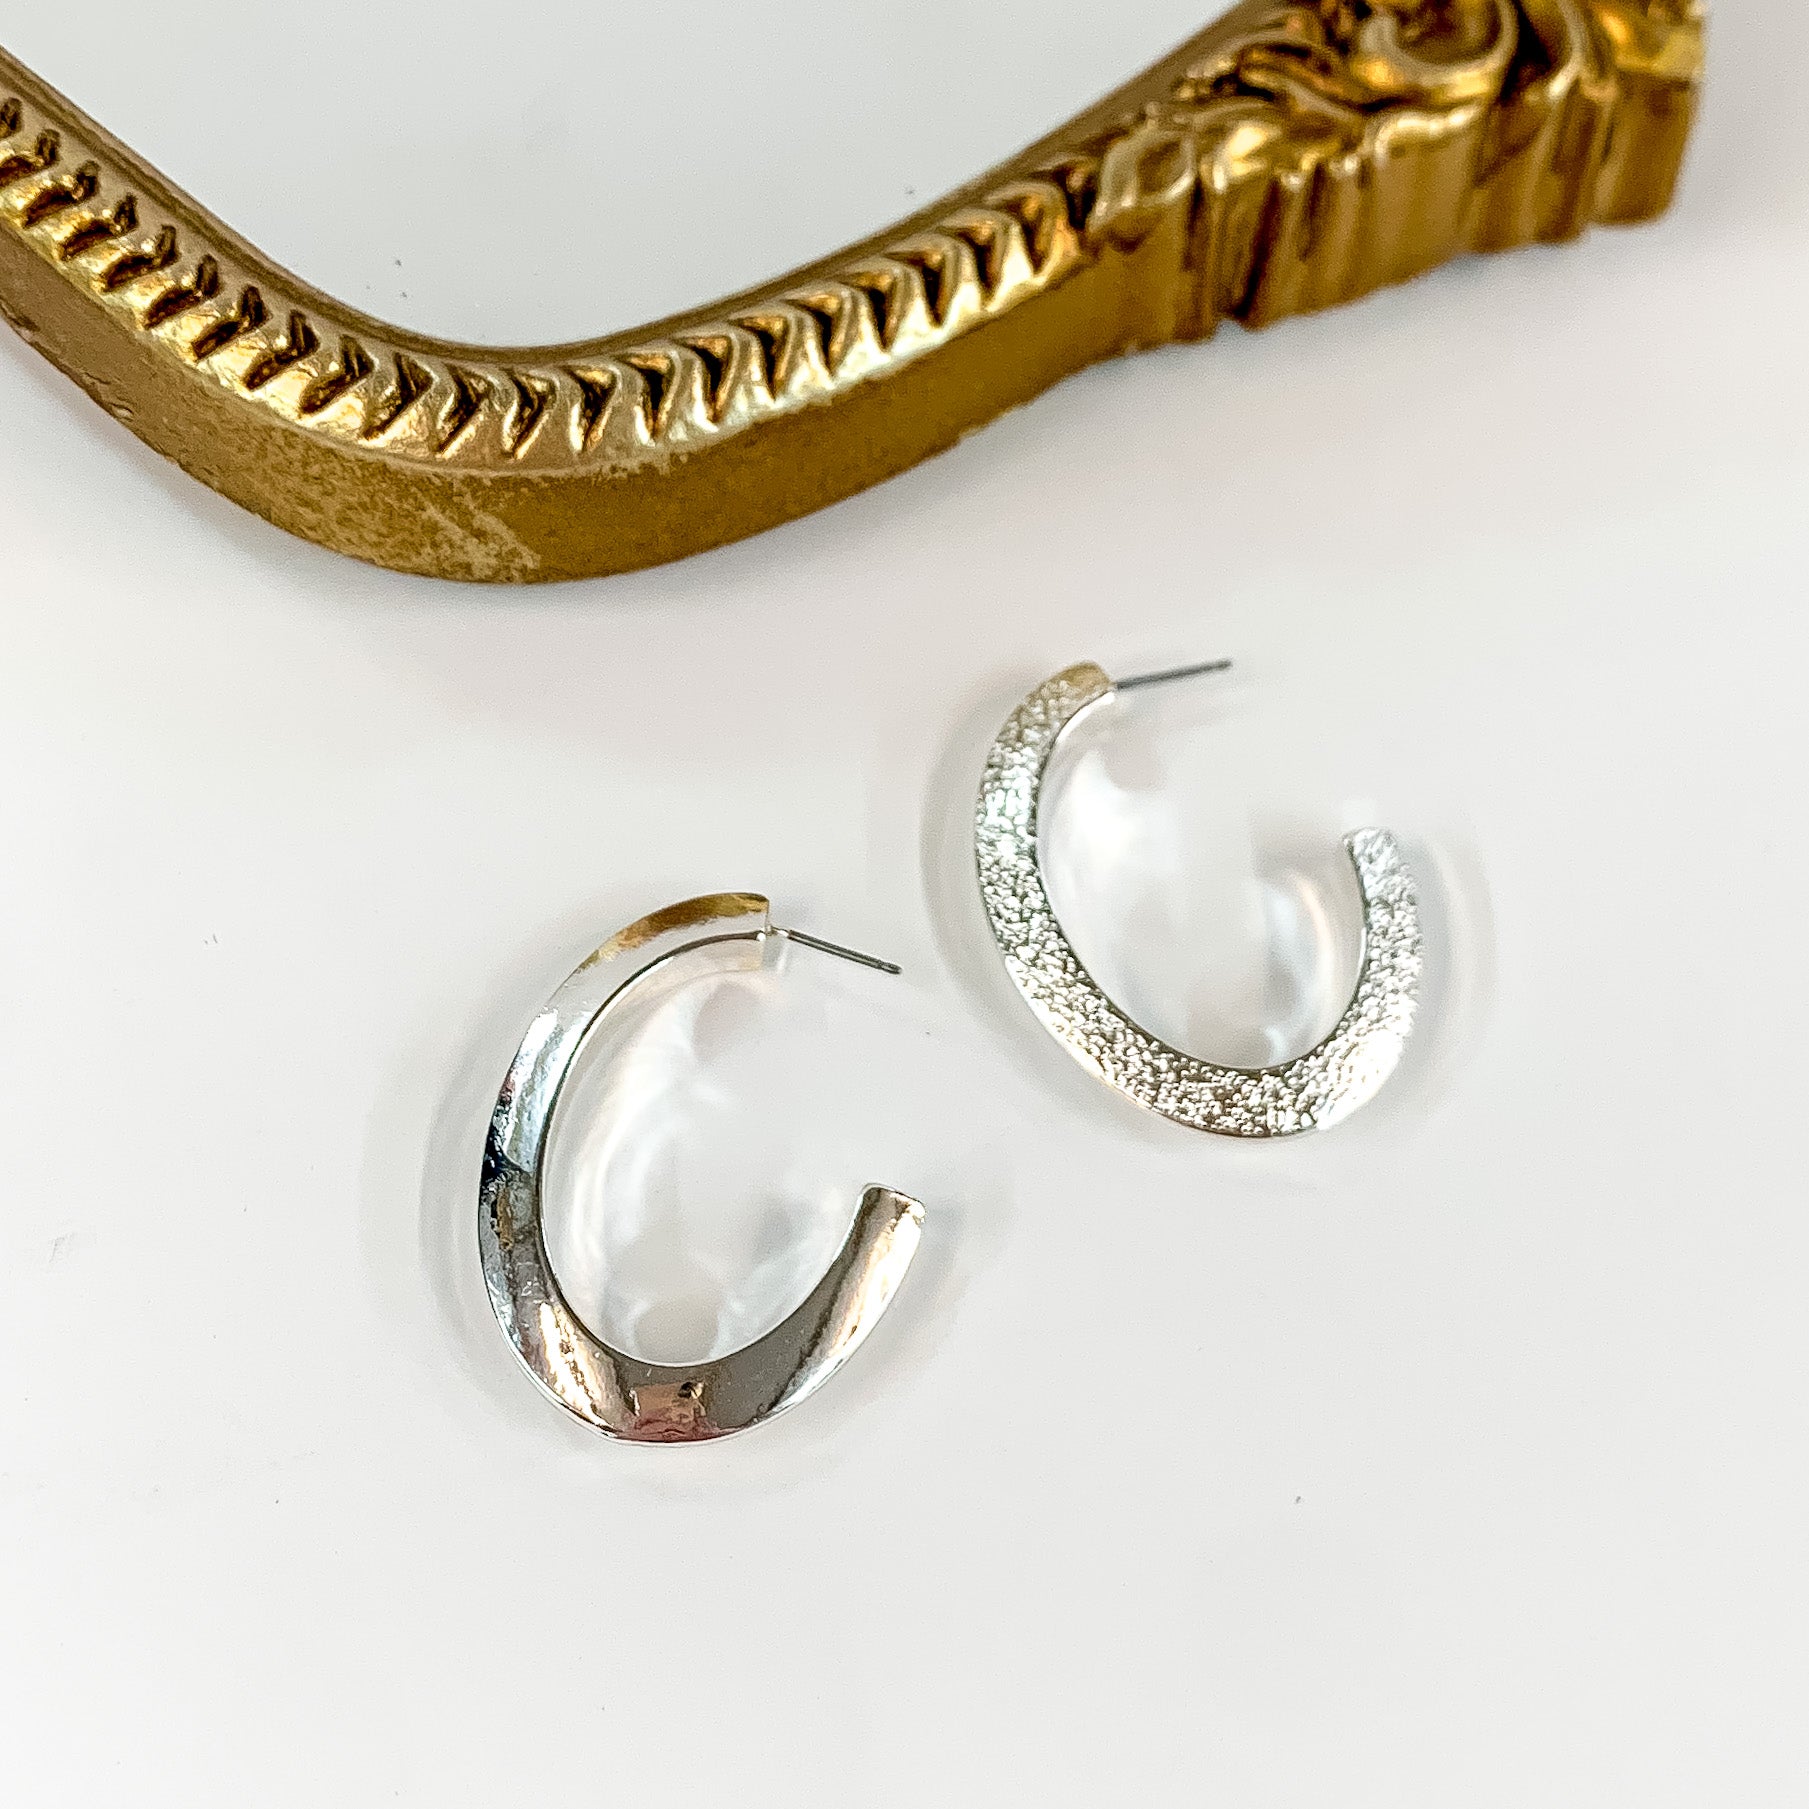 Thick Oval Silver Tone Hoop Earrings. Pictured on a white background with a gold frame at the top.